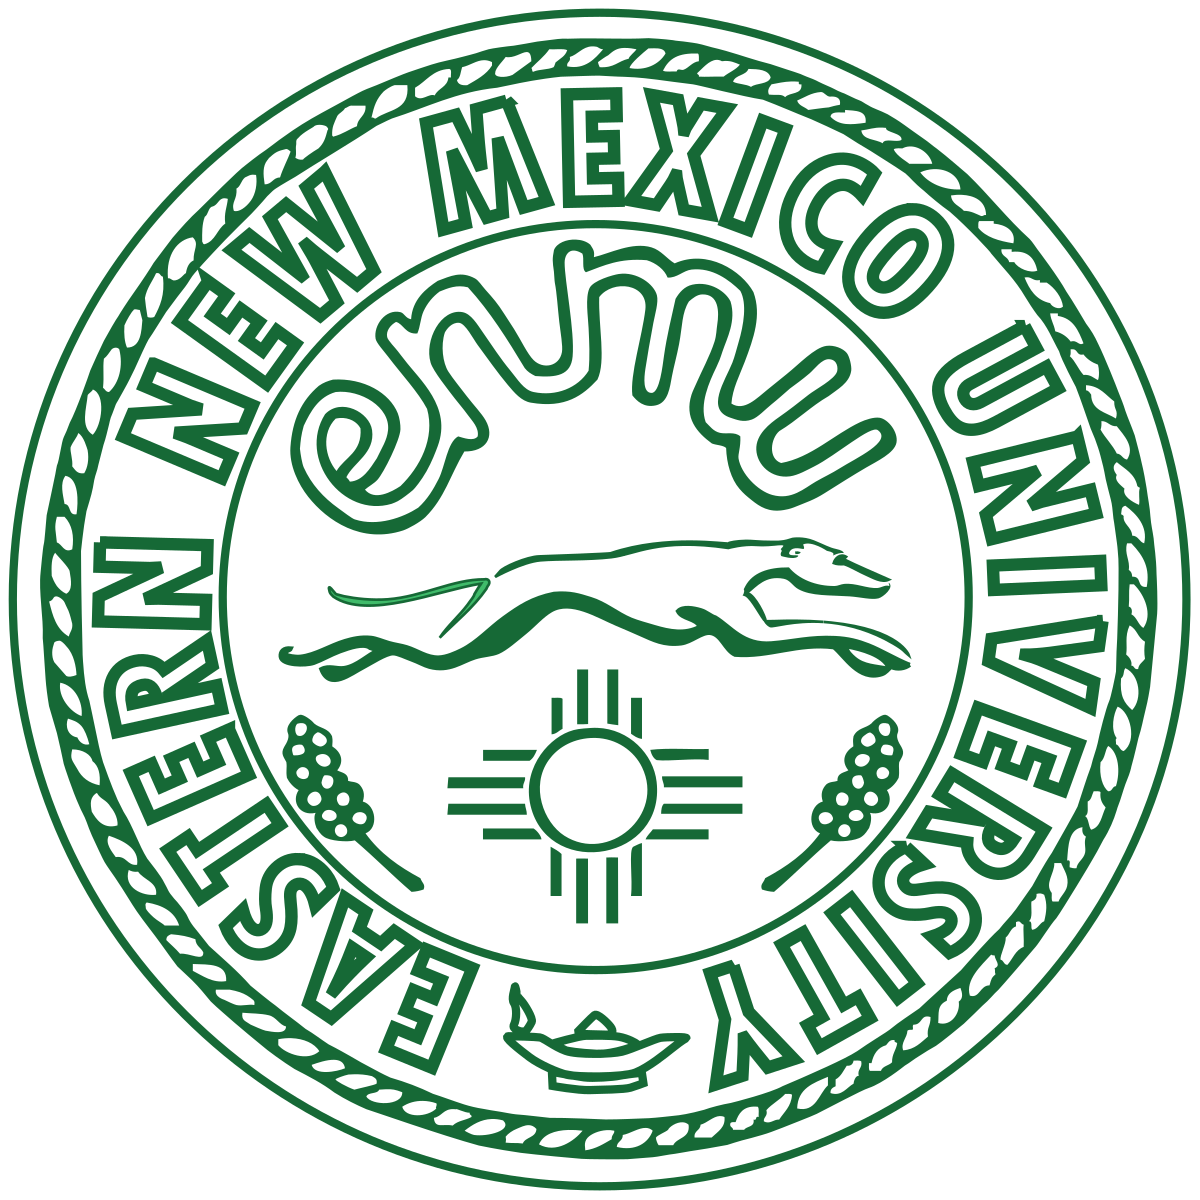 Logo of Eastern New Mexico University for our school profile